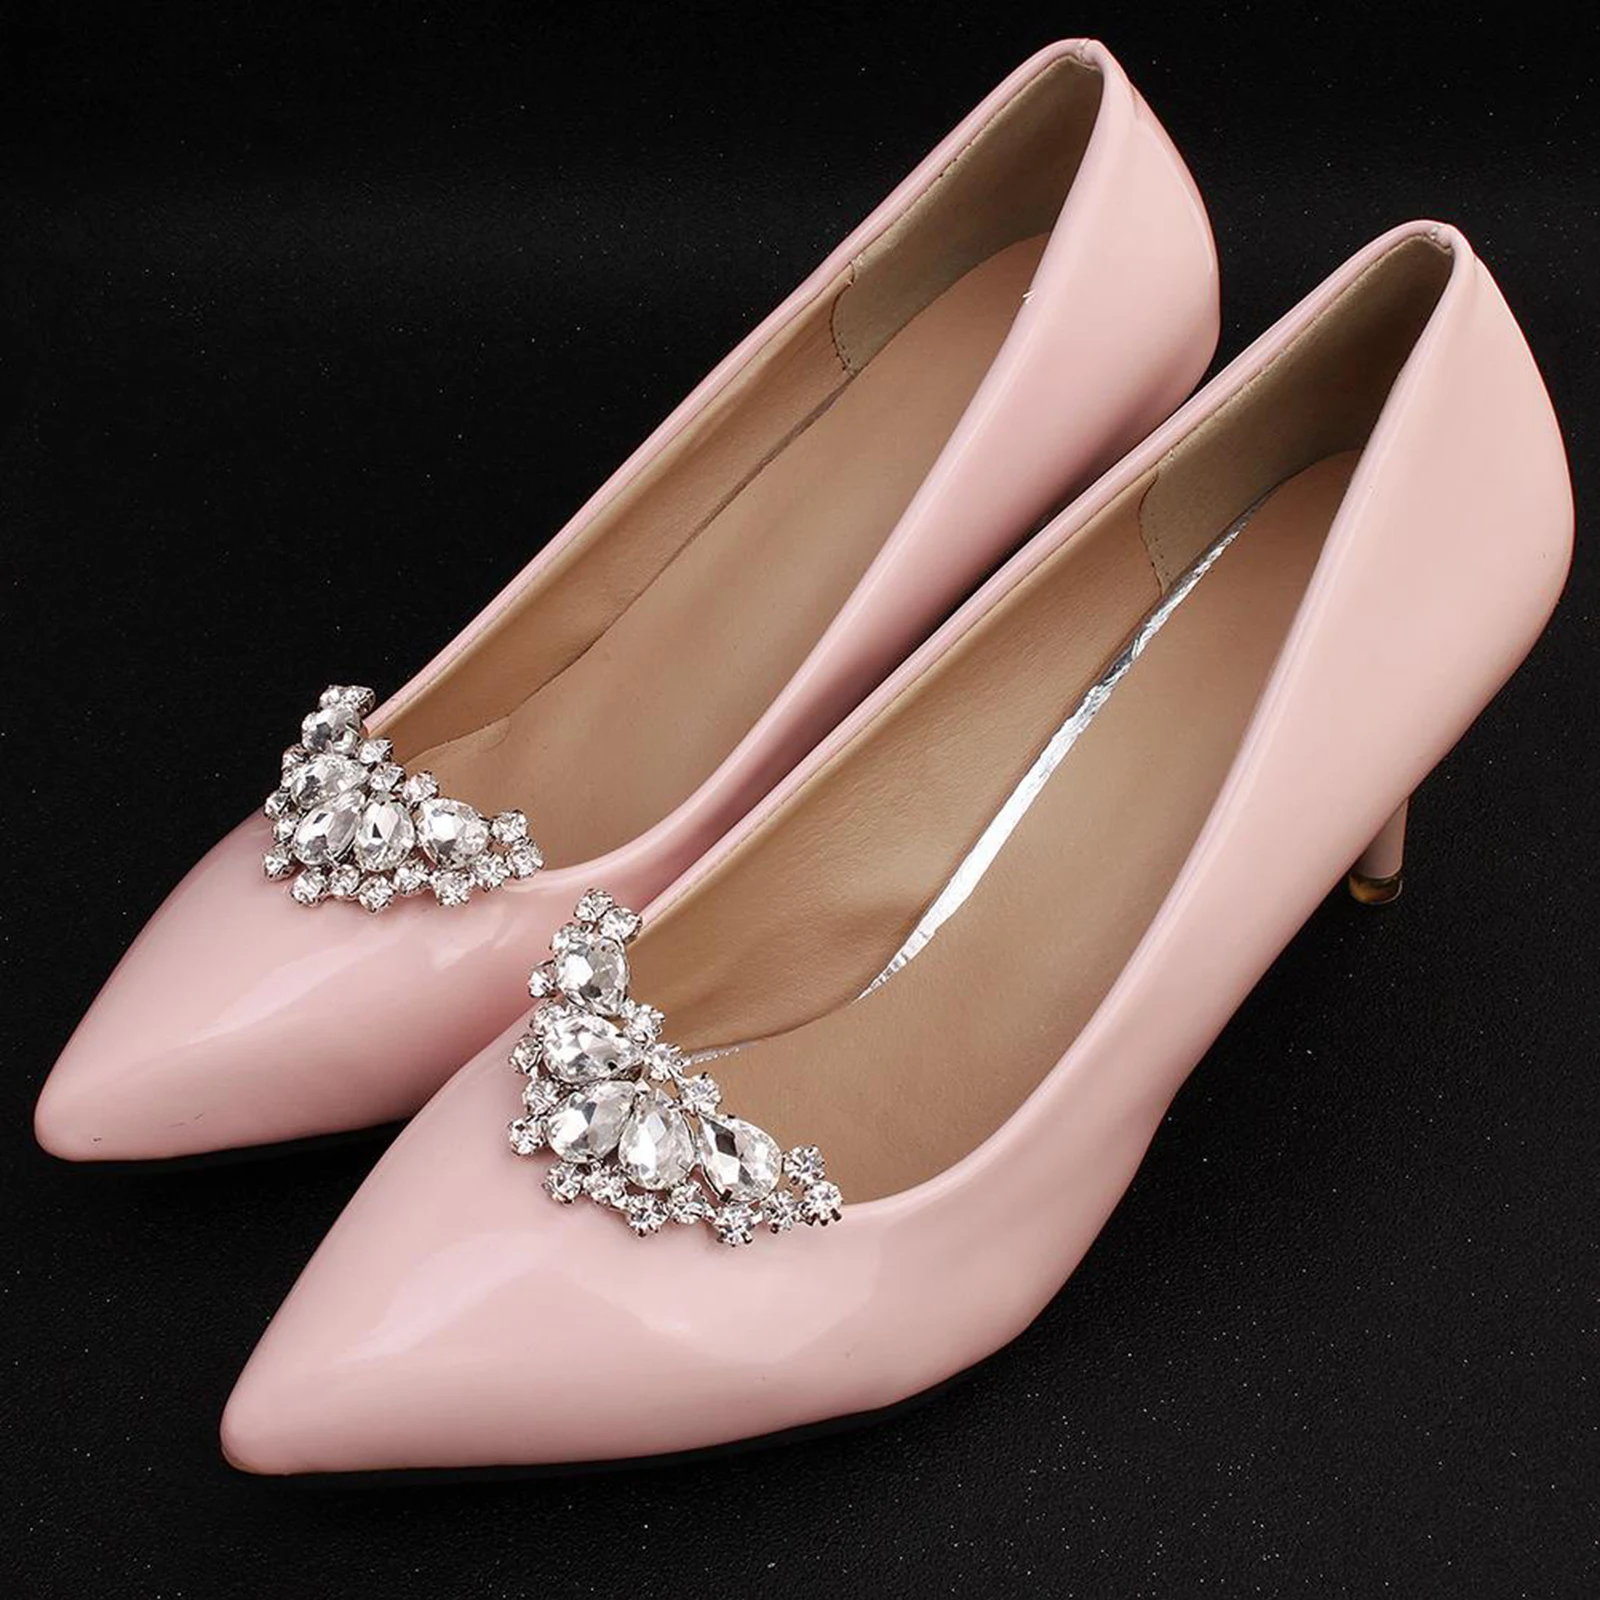 Pair Crystal Shoe Clips Patch Charm Tone Buckle Wedding Bridal Party Decorations